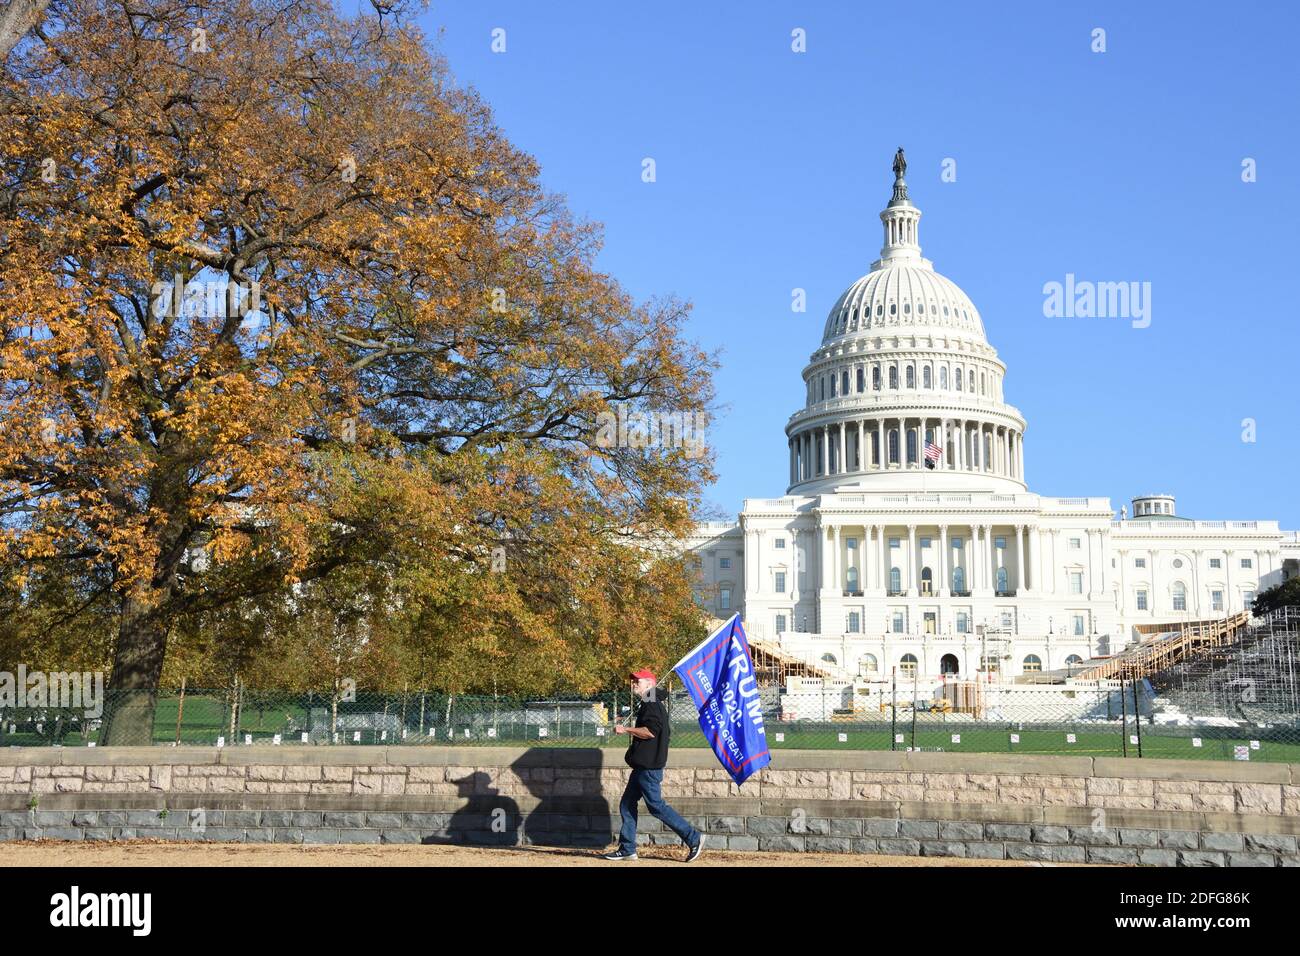 Washington DC. November 14, 2020. Million Maga March. A man with red cap walking with Trump 2020 flag in front of the US Capitol building. Stock Photo